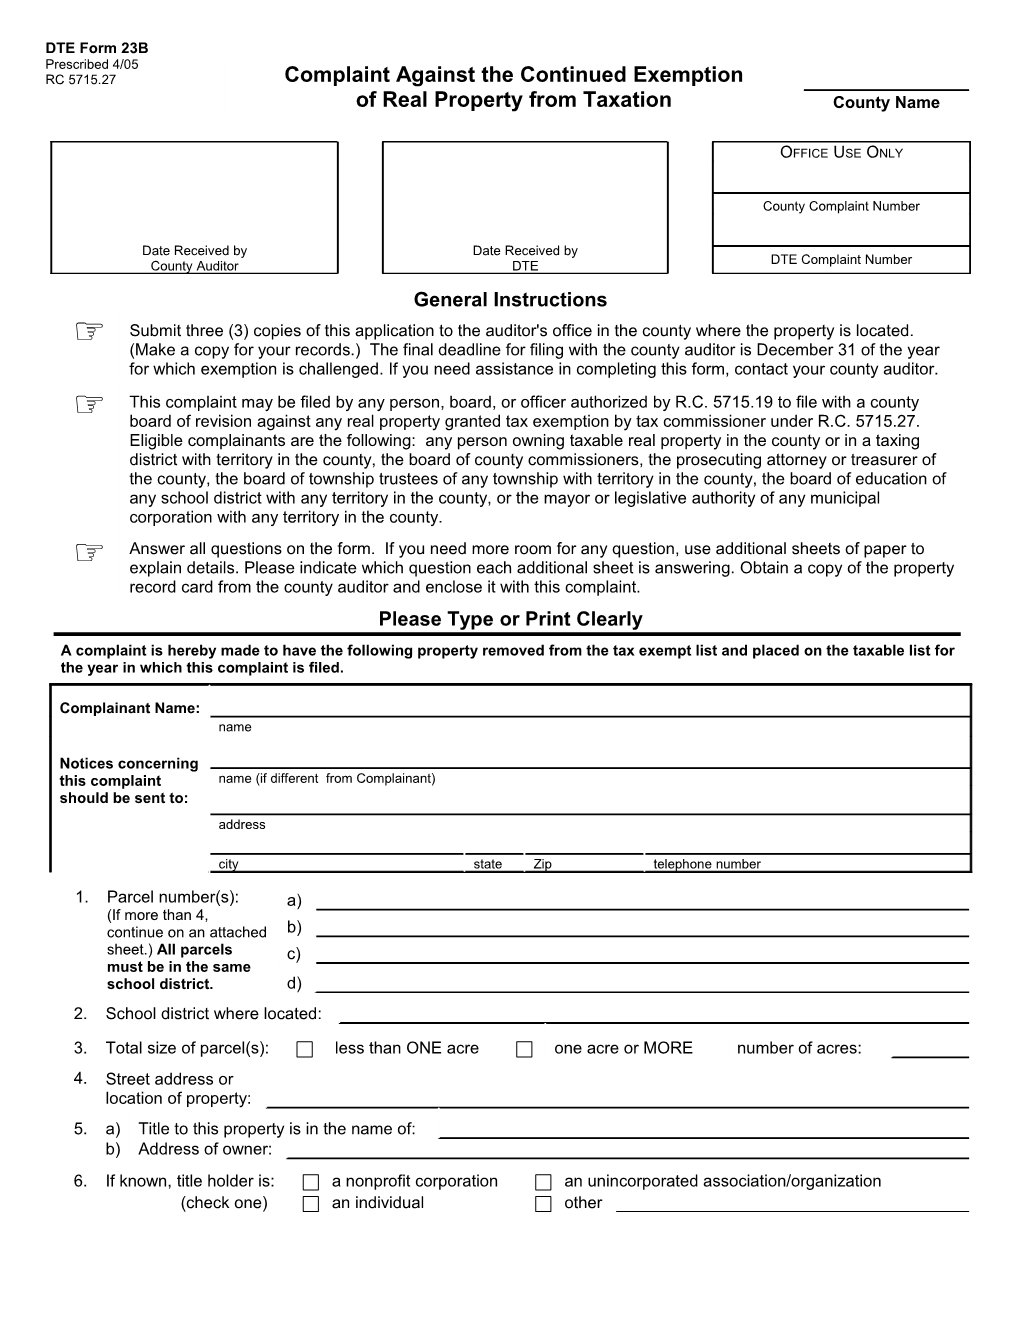 Application for Real Property Tax